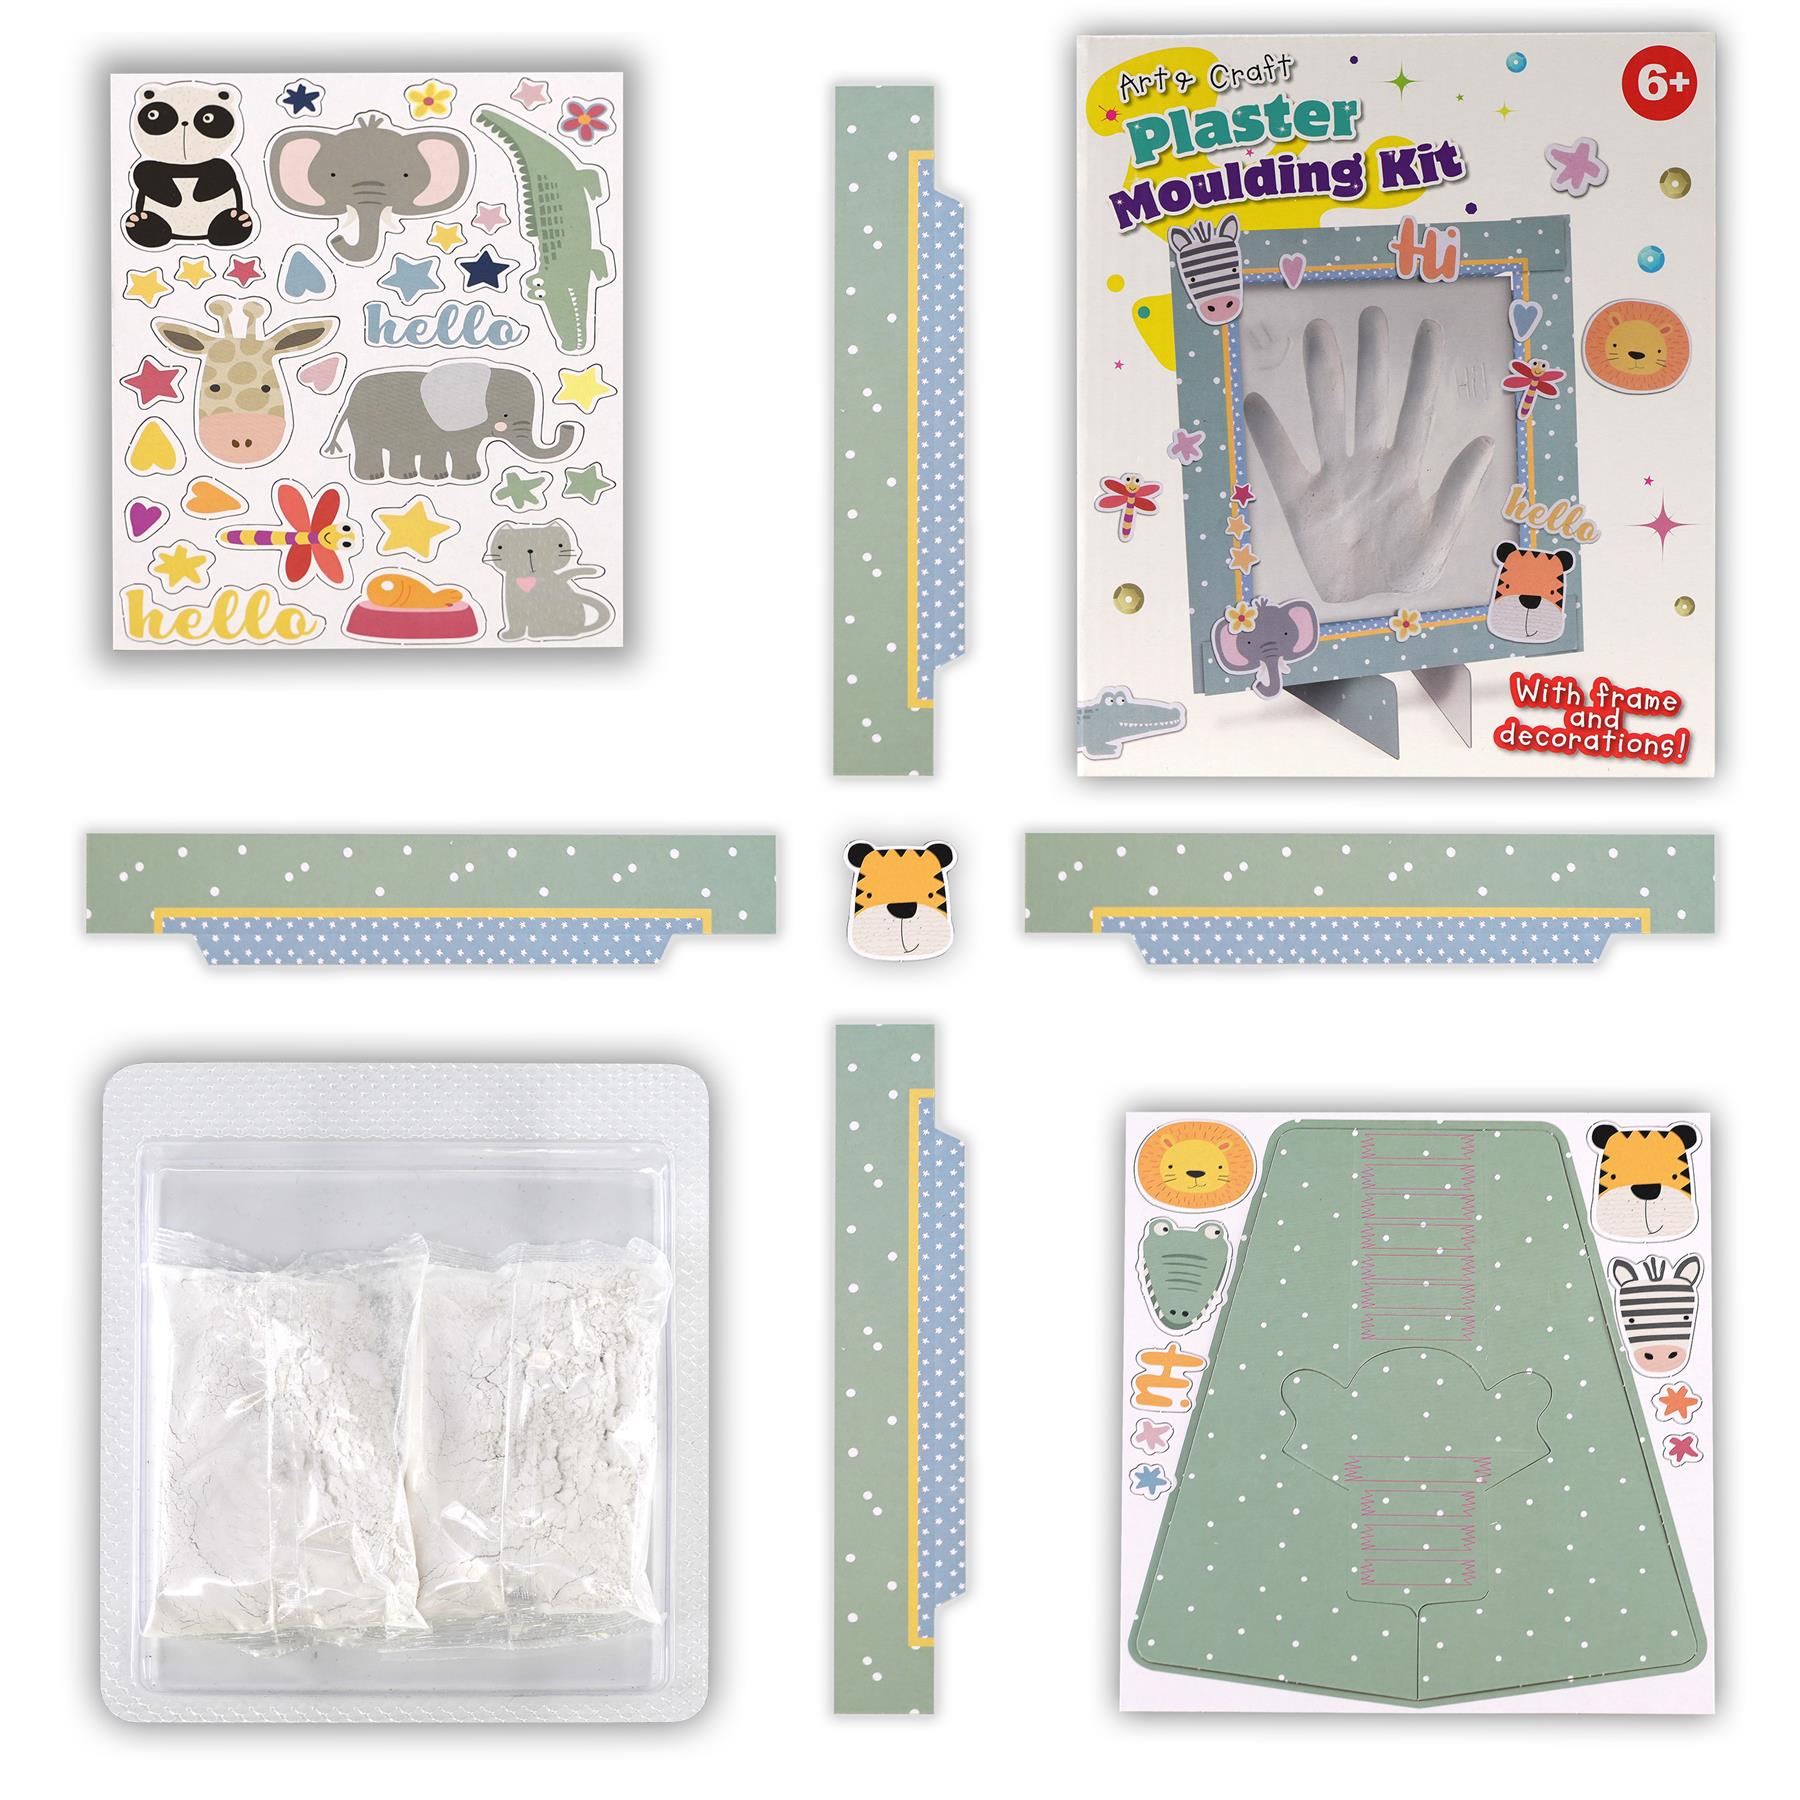 Handprint Plaster Moulding Kit by The Magic Toy Shop - The Magic Toy Shop